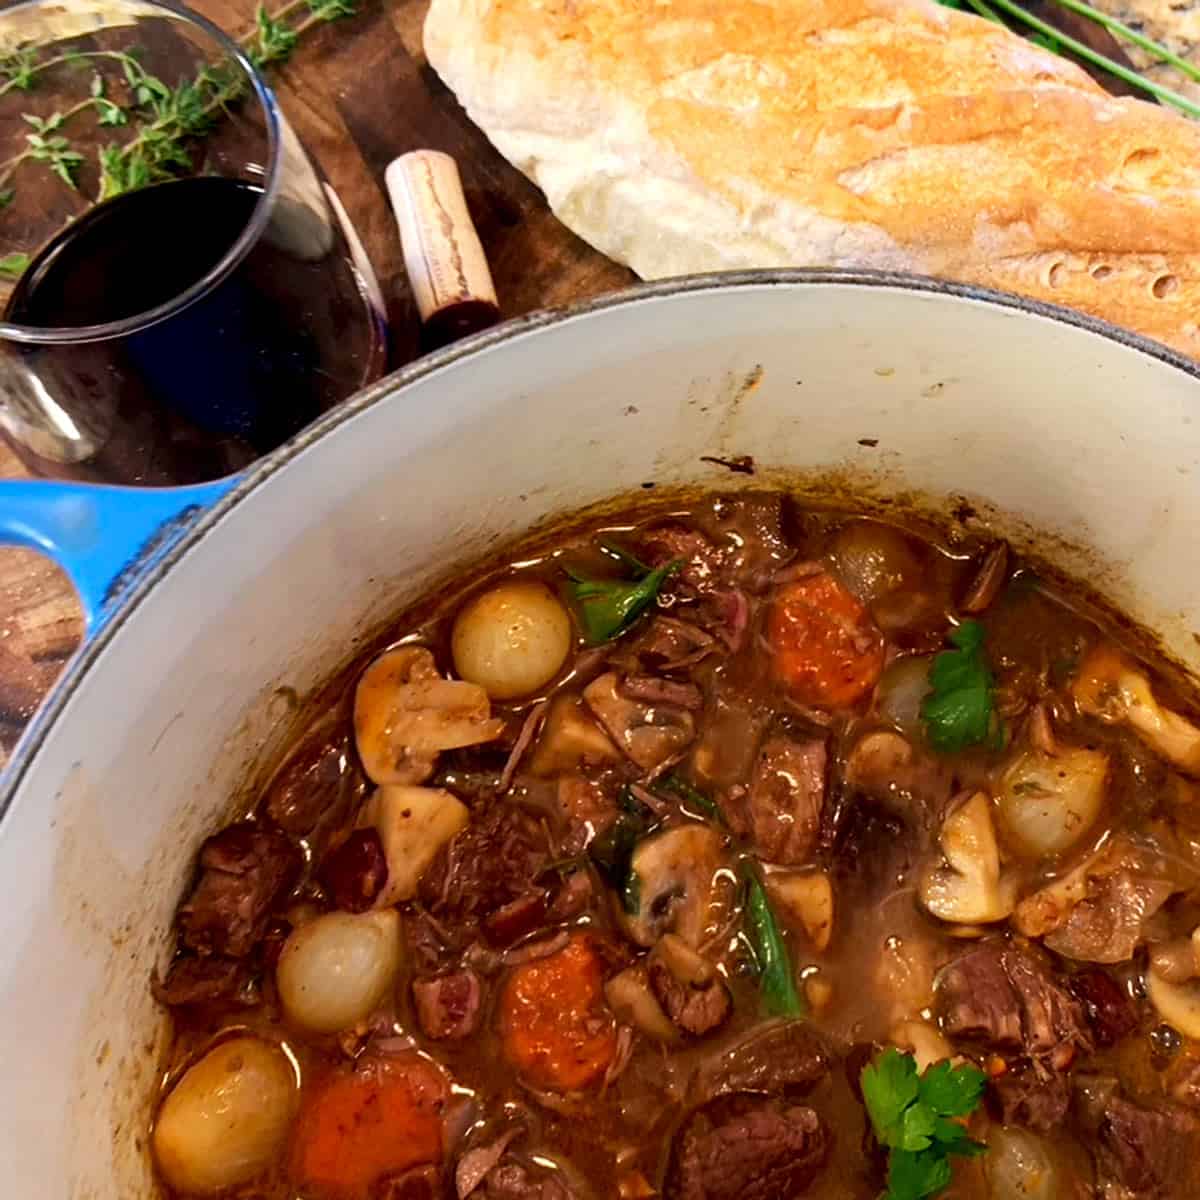 A pot of beef bourguignon with bread and red wine.